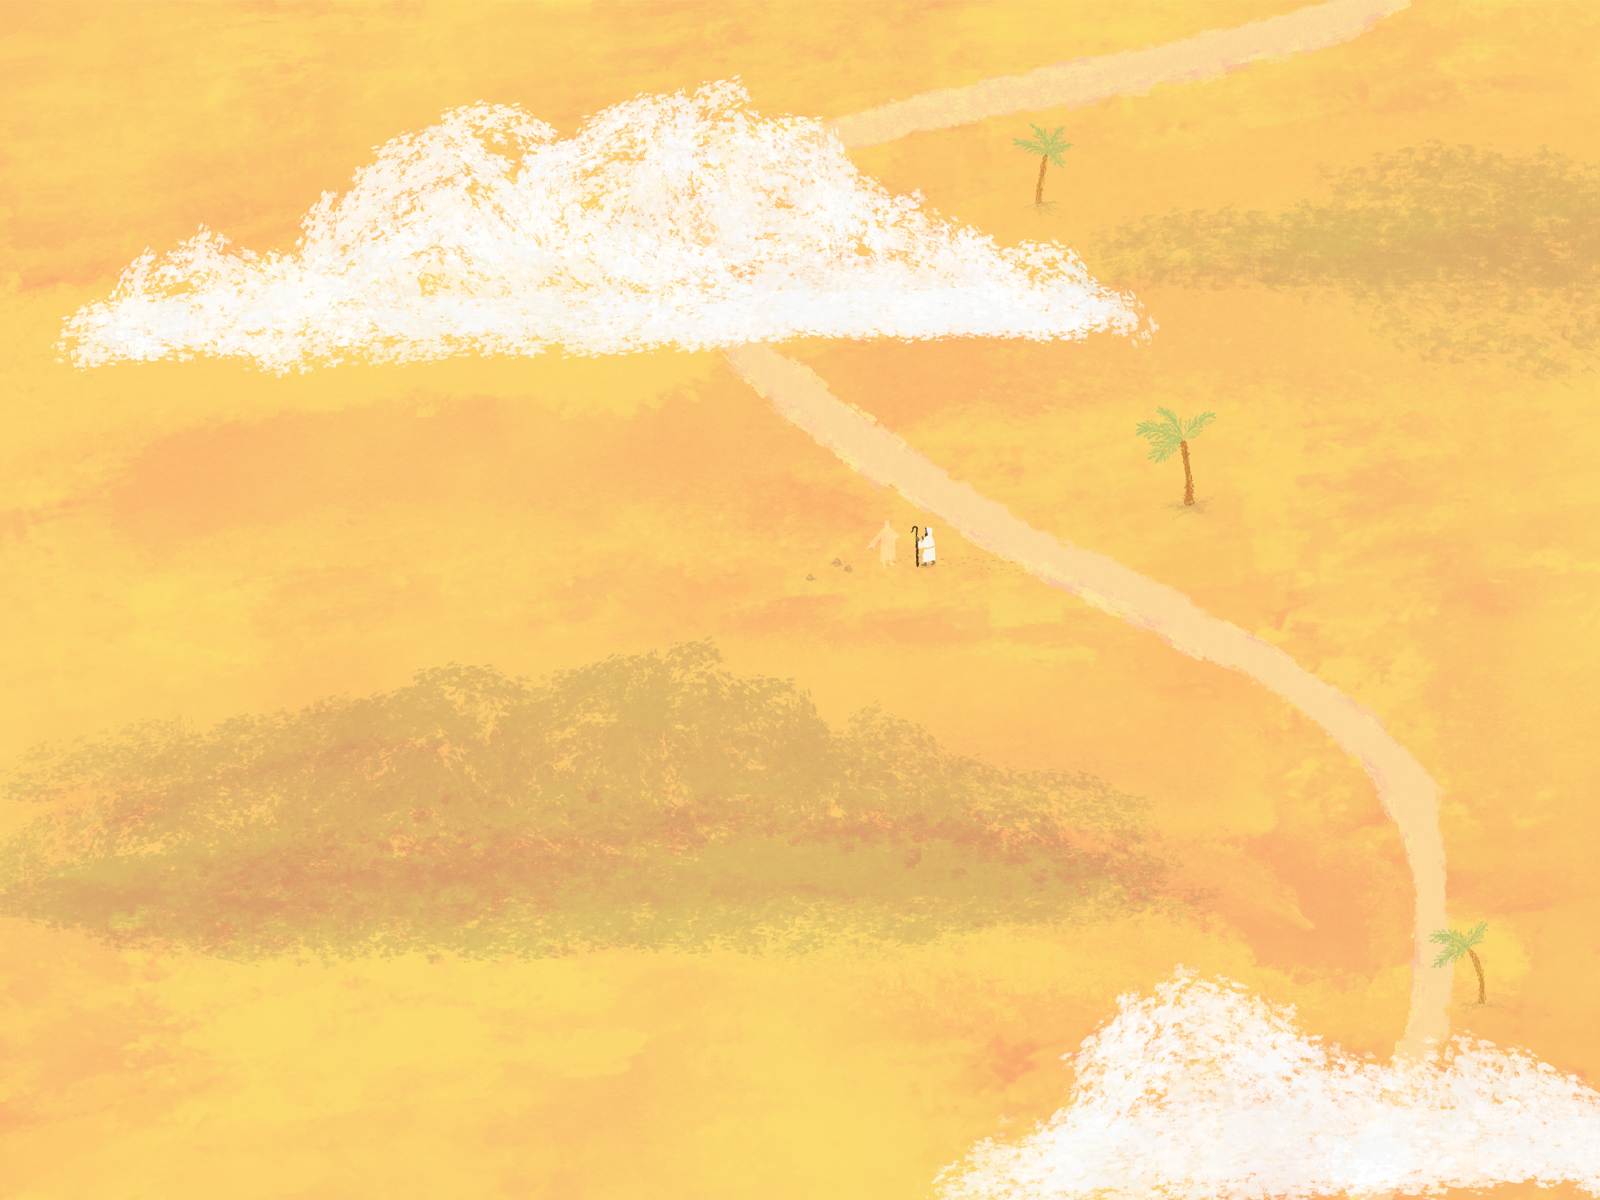 An illustration of a pathway in a desert. Two small figures can be seen beside the path.